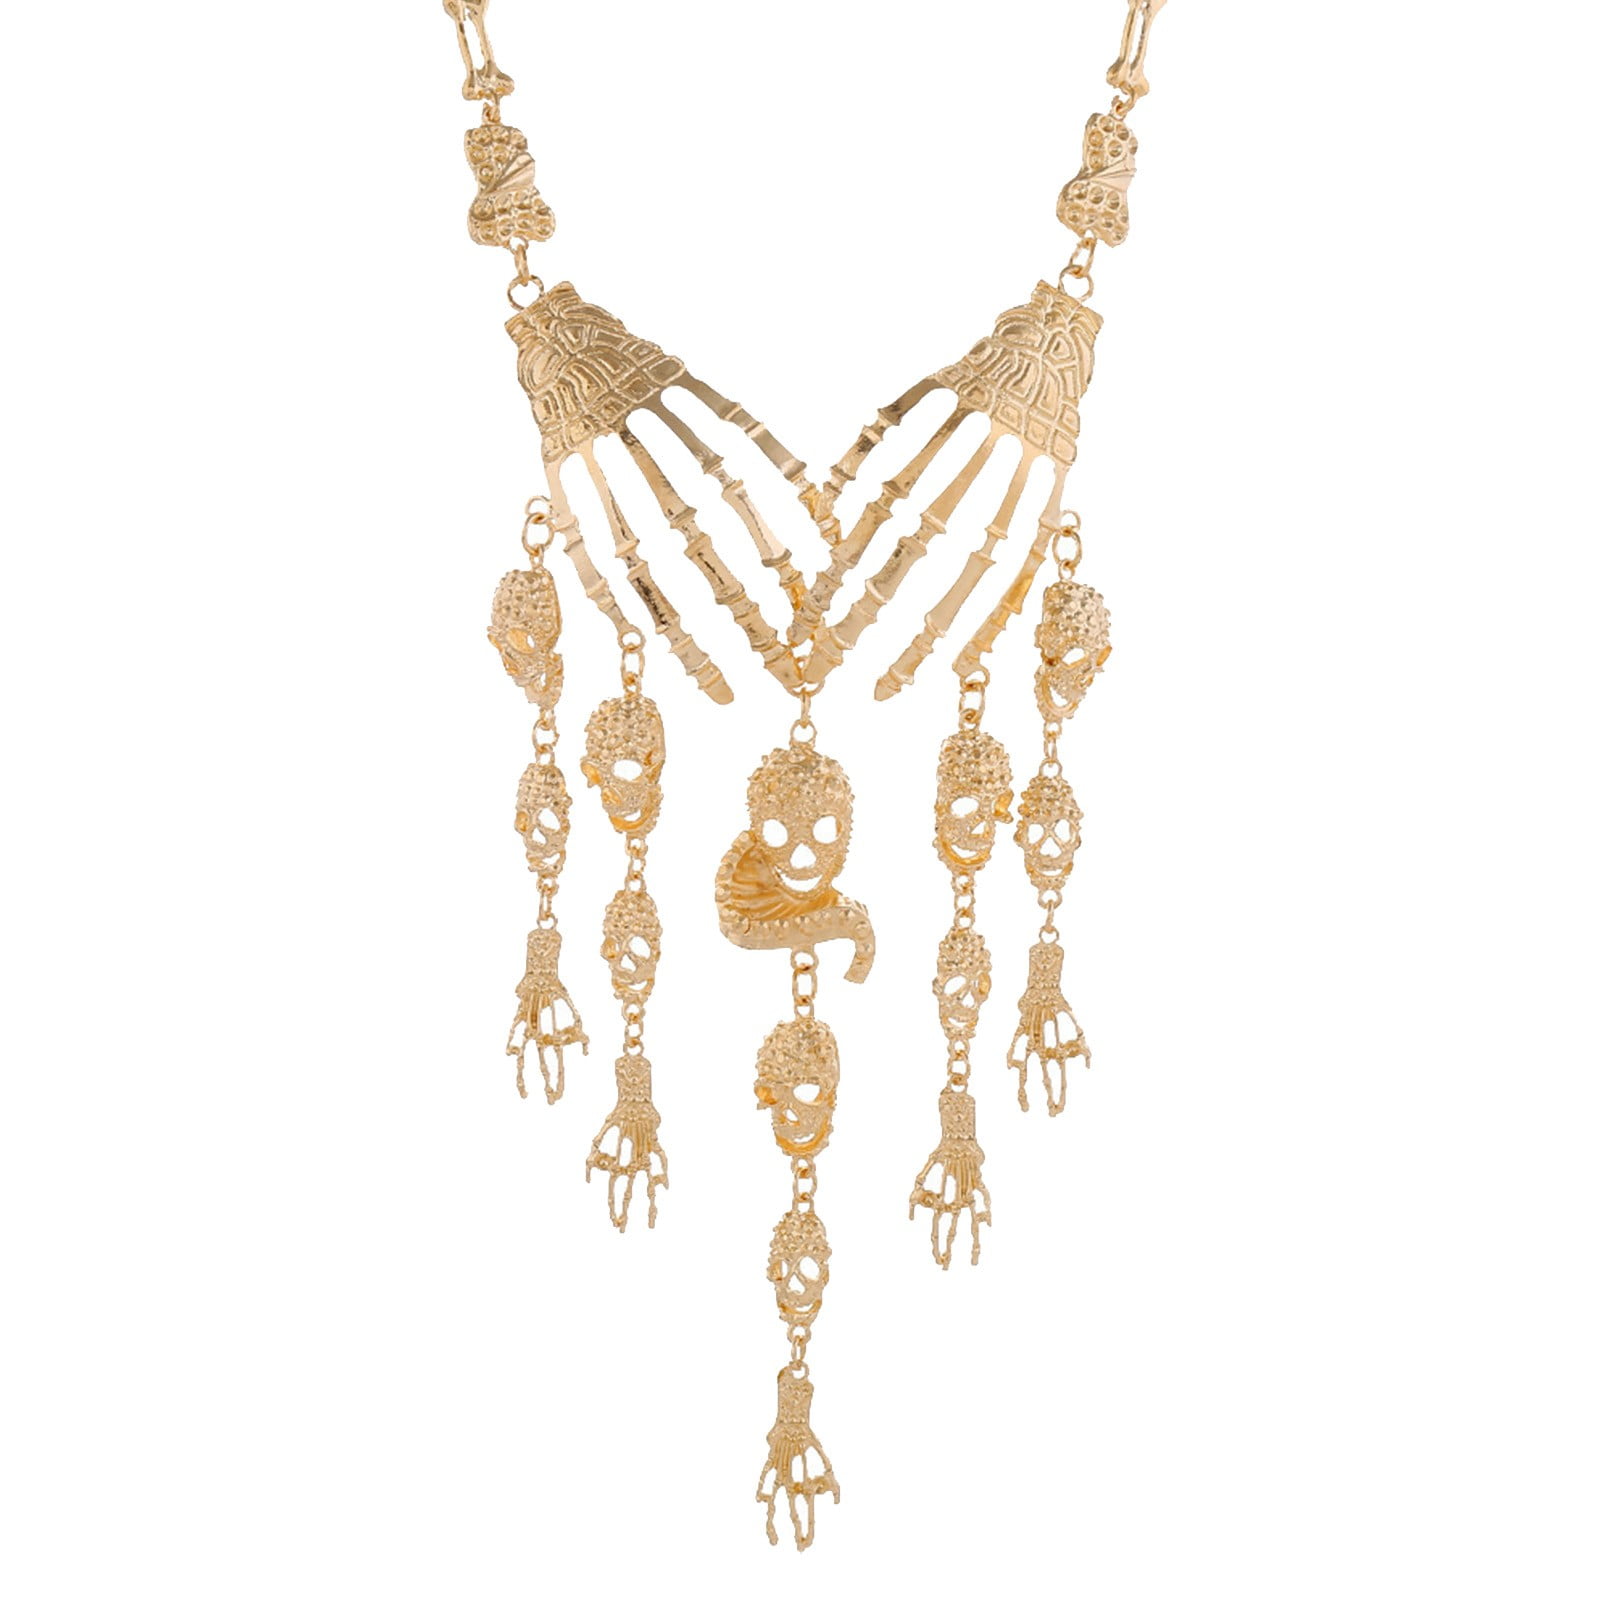 Jewelry Chains Statement Necklaces Fossil Statement Necklace gold-colored elegant 